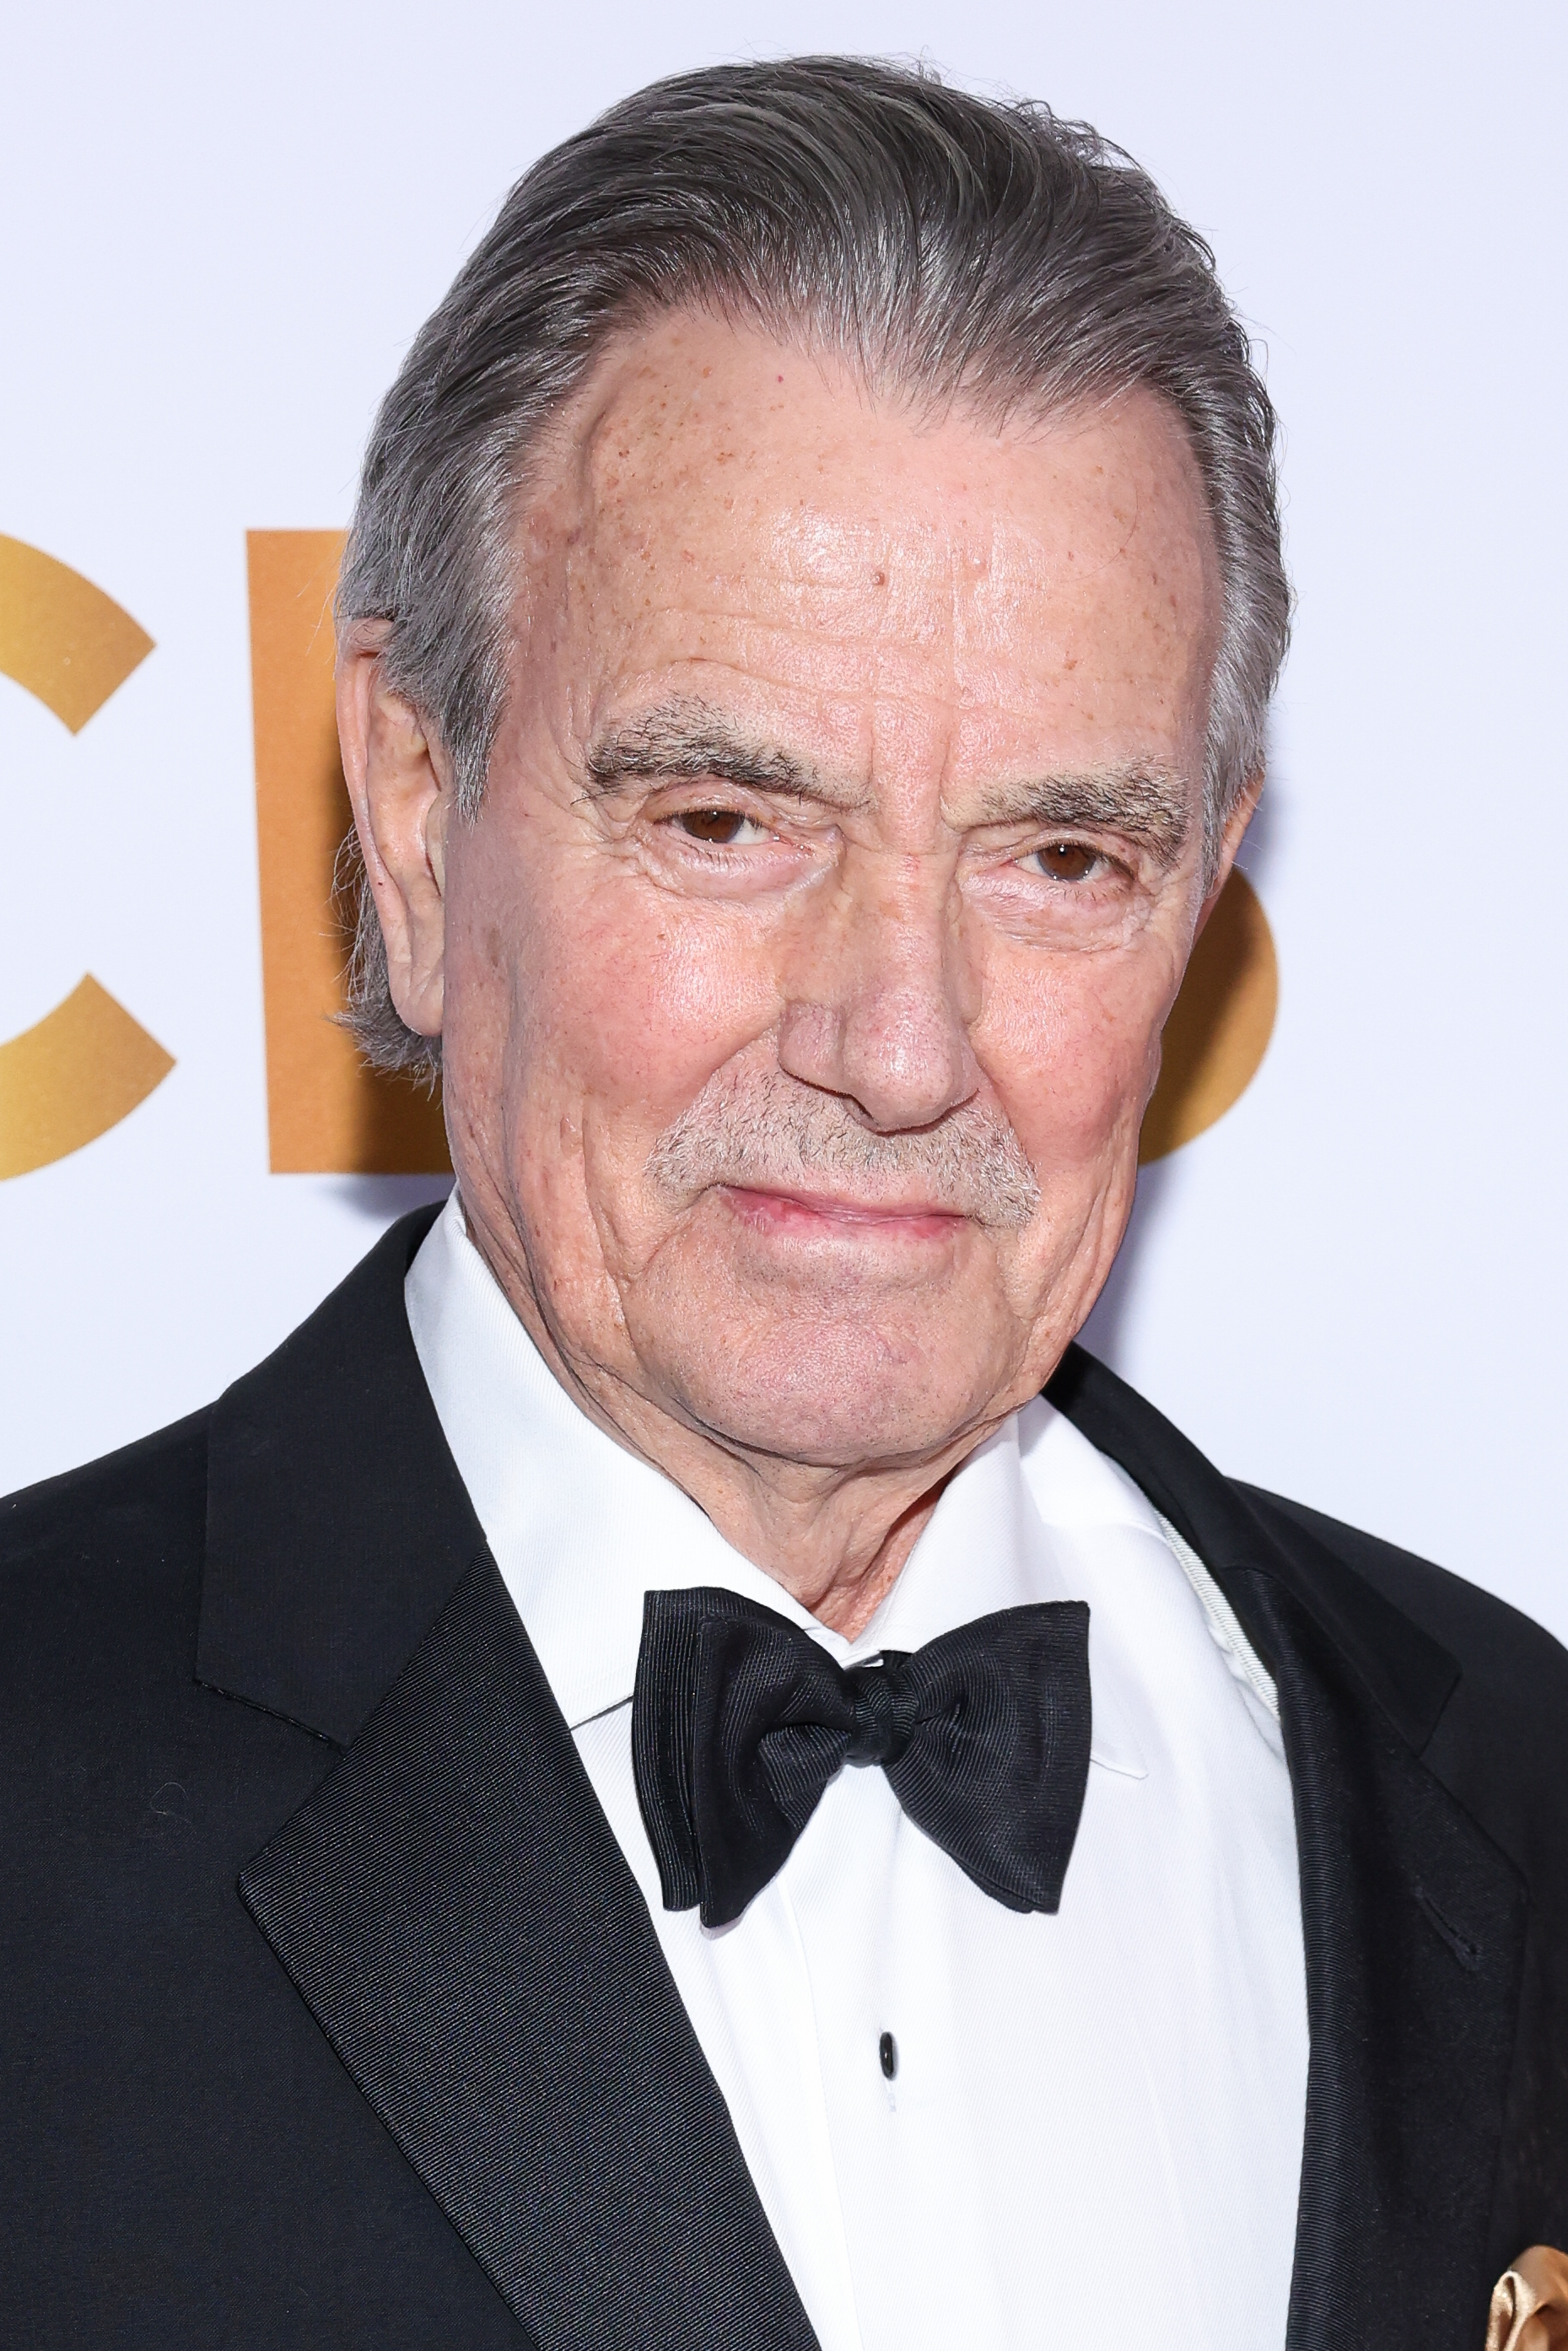 Eric Braeden attends Red carpet event for the 50th Anniversary of Daytime’s #1 Drama "The Young and The Restless" at Vibiana on March 17, 2023 in Los Angeles, California. | Source: Getty Images